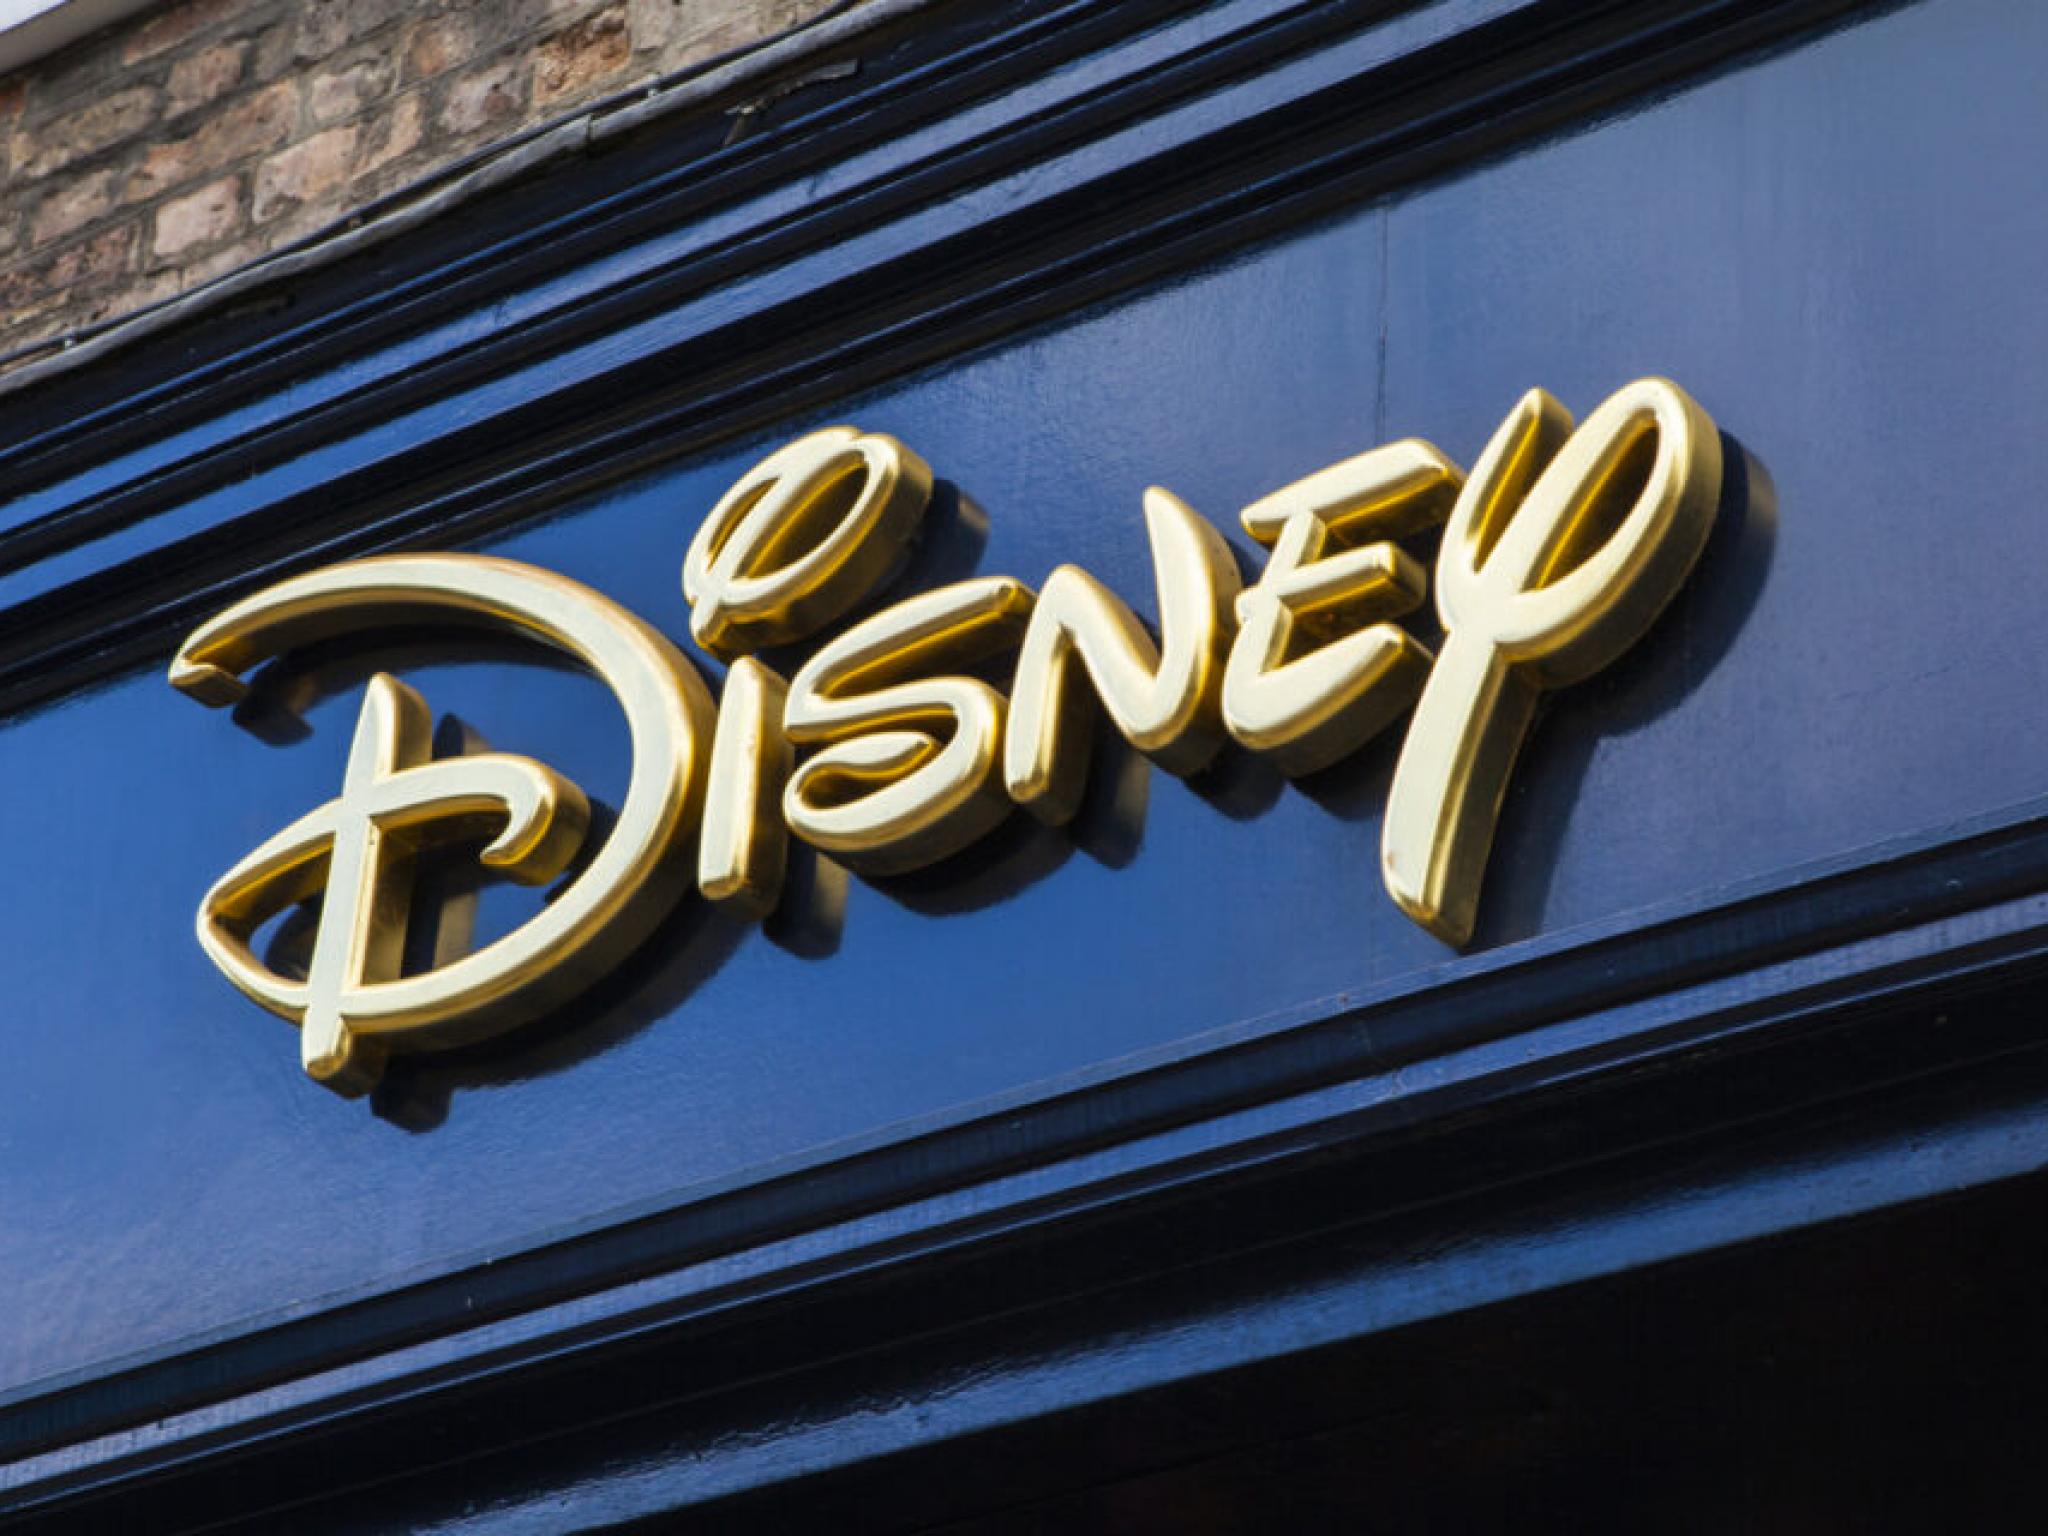  whats-going-on-with-disney-stock-ahead-of-earnings 